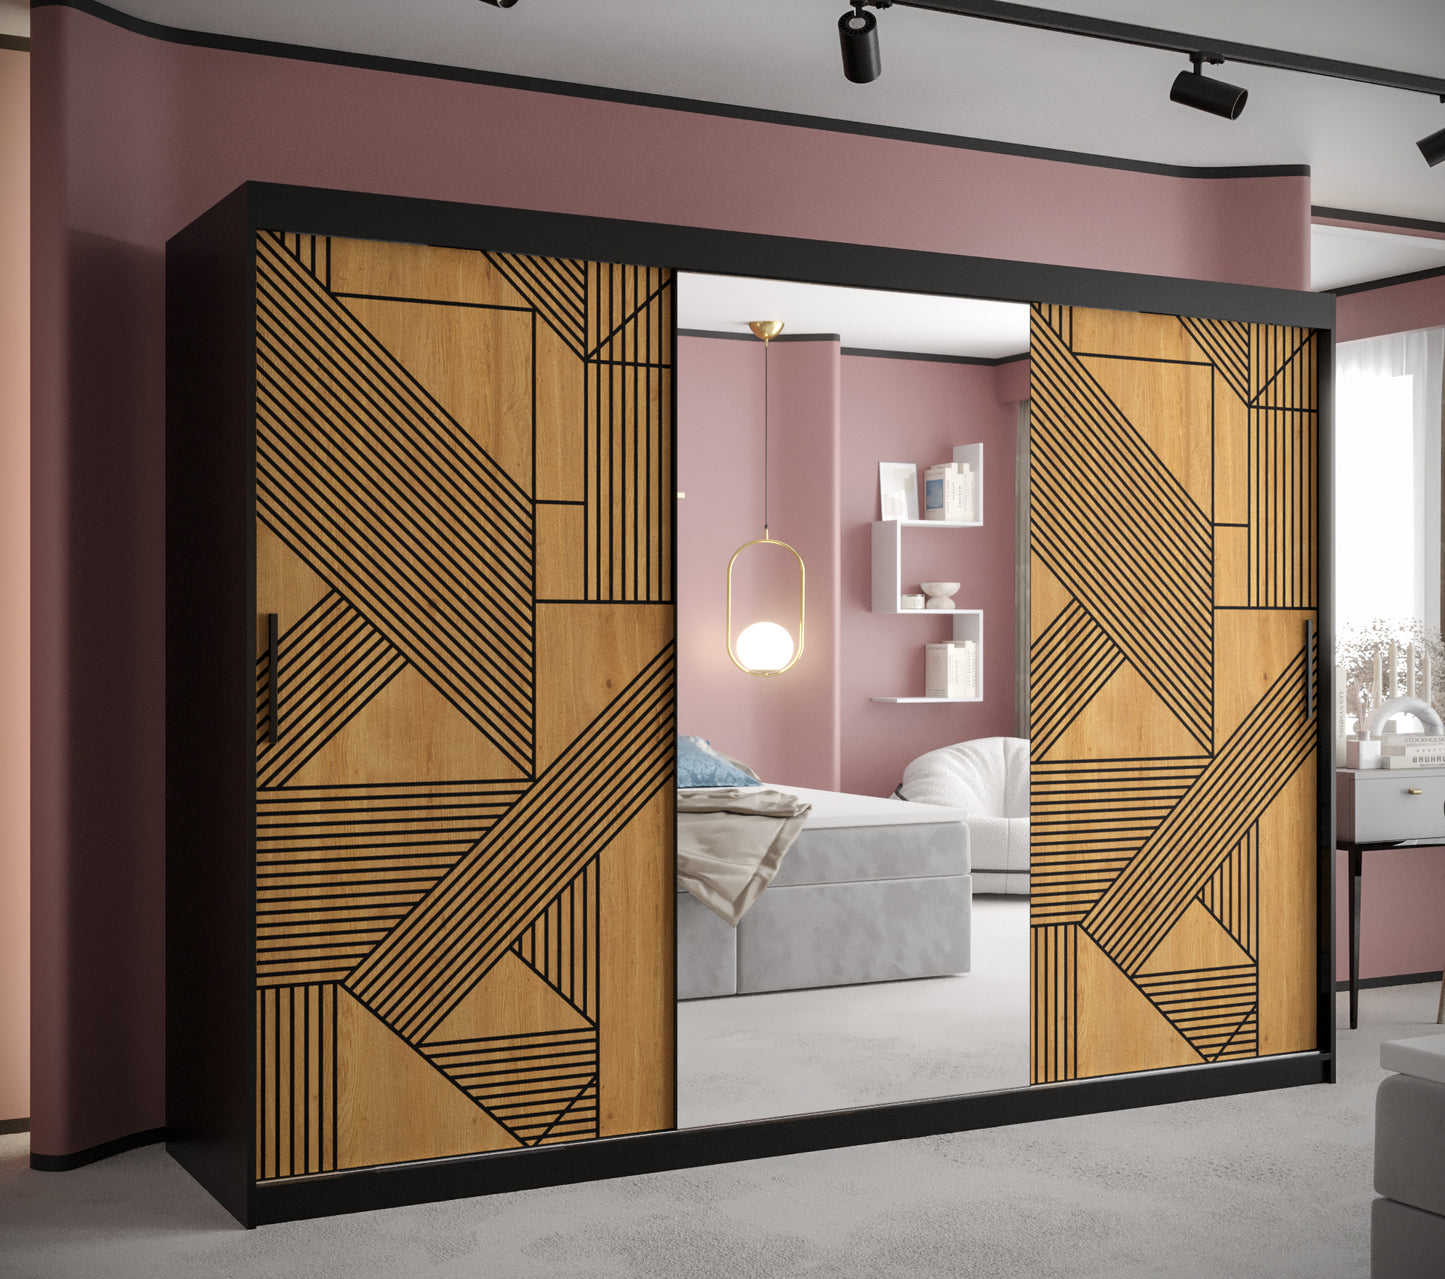 FLORENCE - Wardrobe Sliding Doors Black with Unique Pattern, Shelves, Rails, Drawers Optional, ASSEMBLY INCLUDED>250cm<